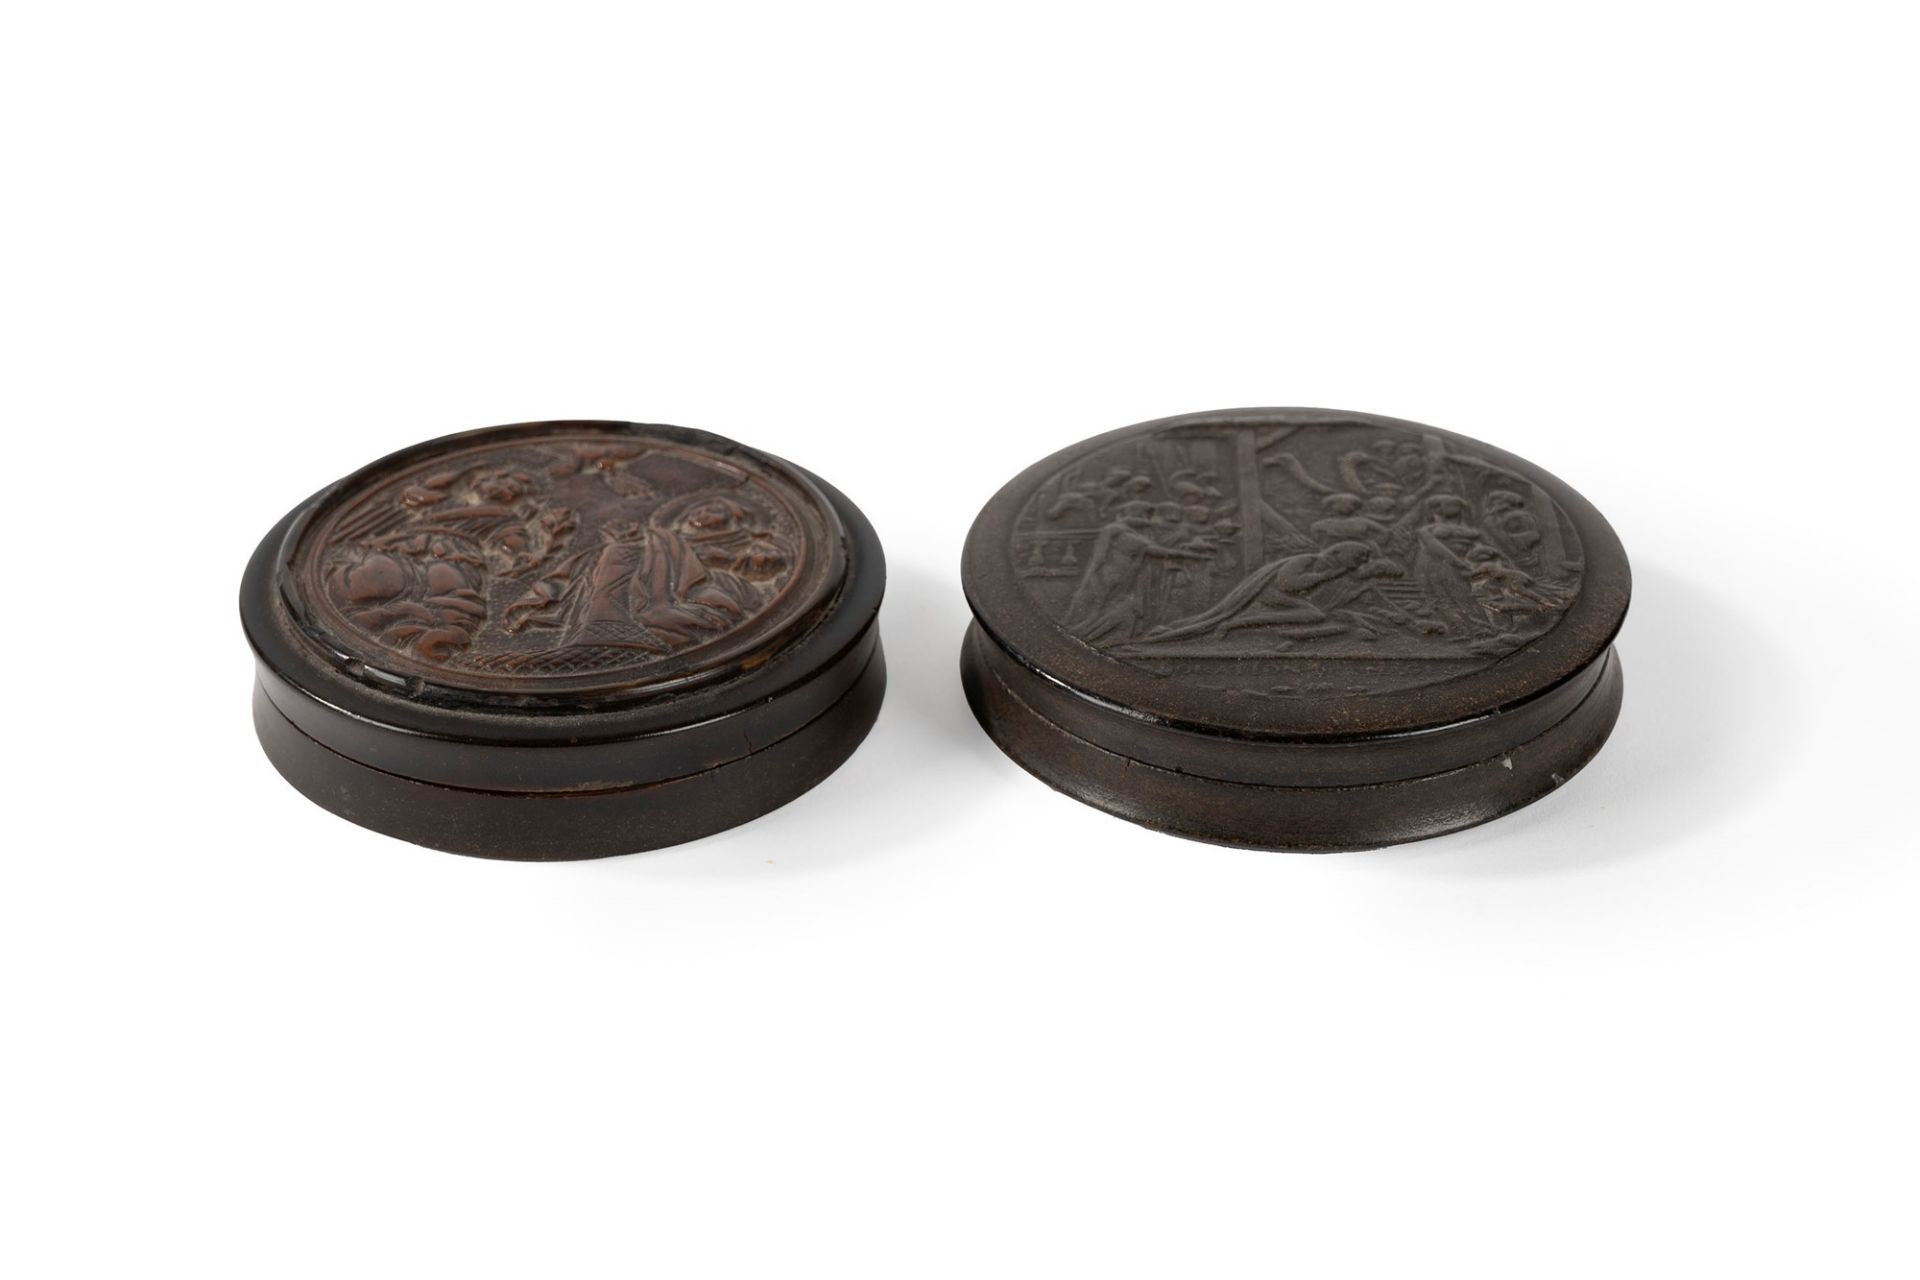 Lot consisting of two snuffboxes with religious scenes on the lid, 19th century - Image 2 of 2